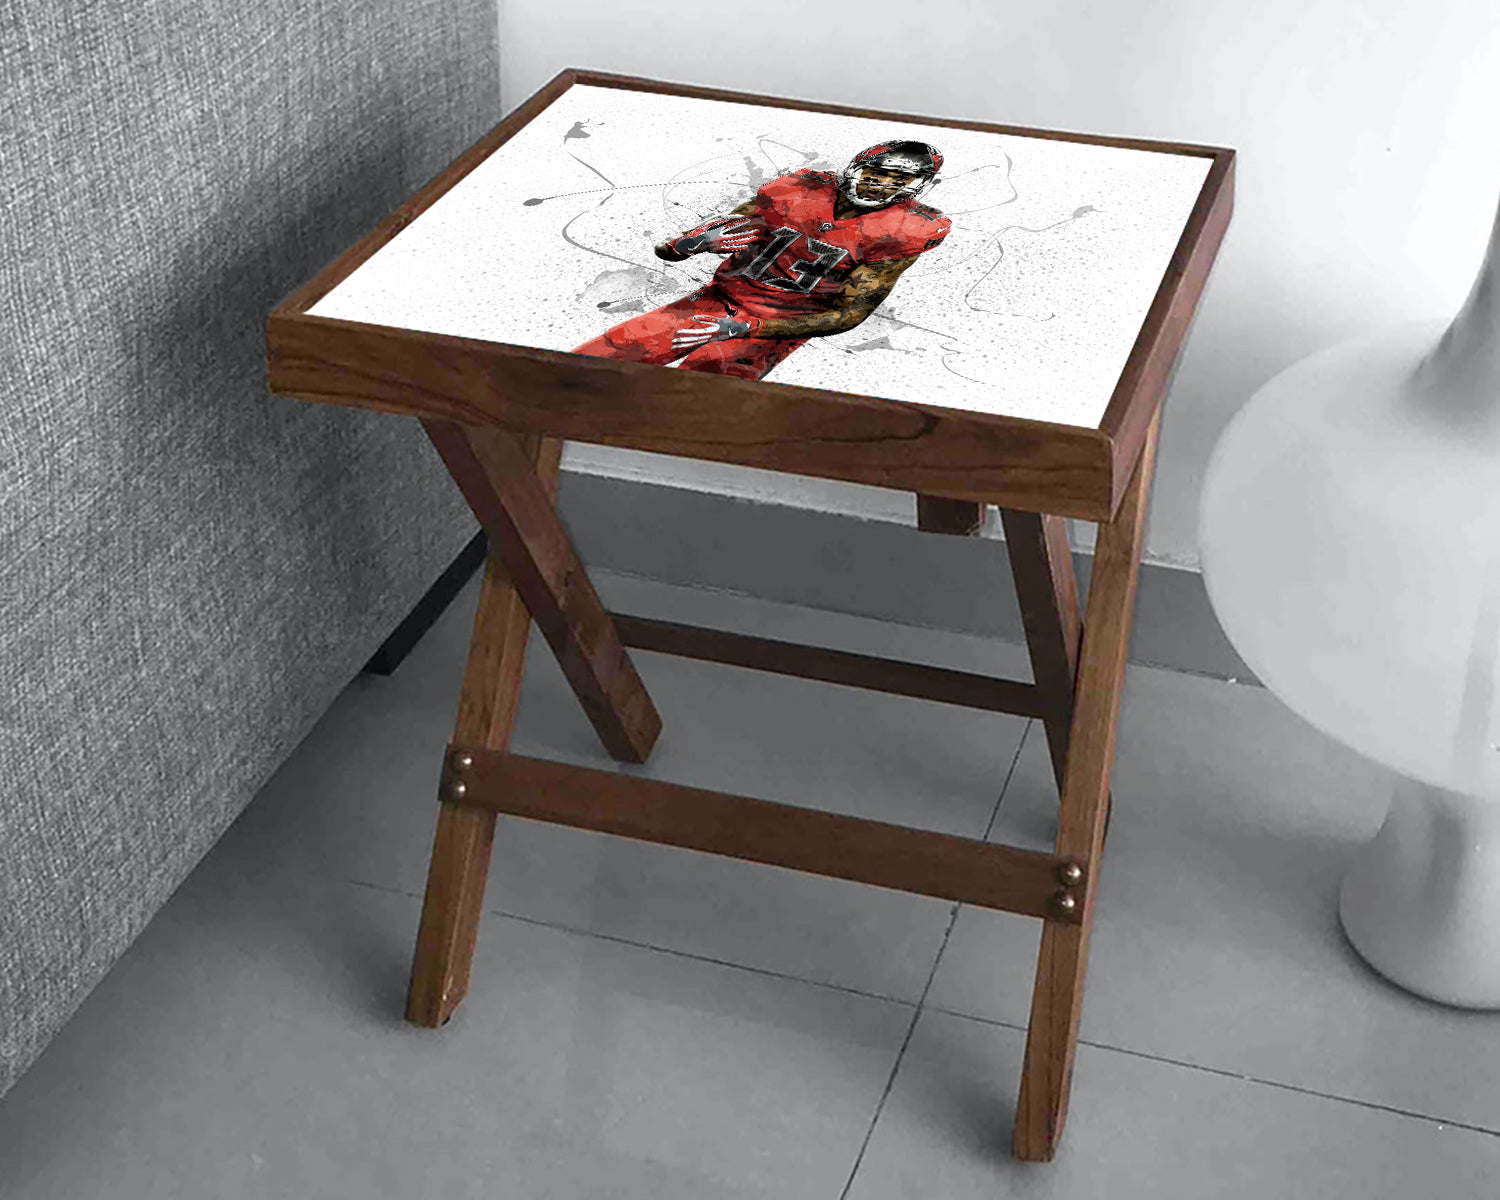 Mike Evans Splash Effect Coffee and Laptop Table 